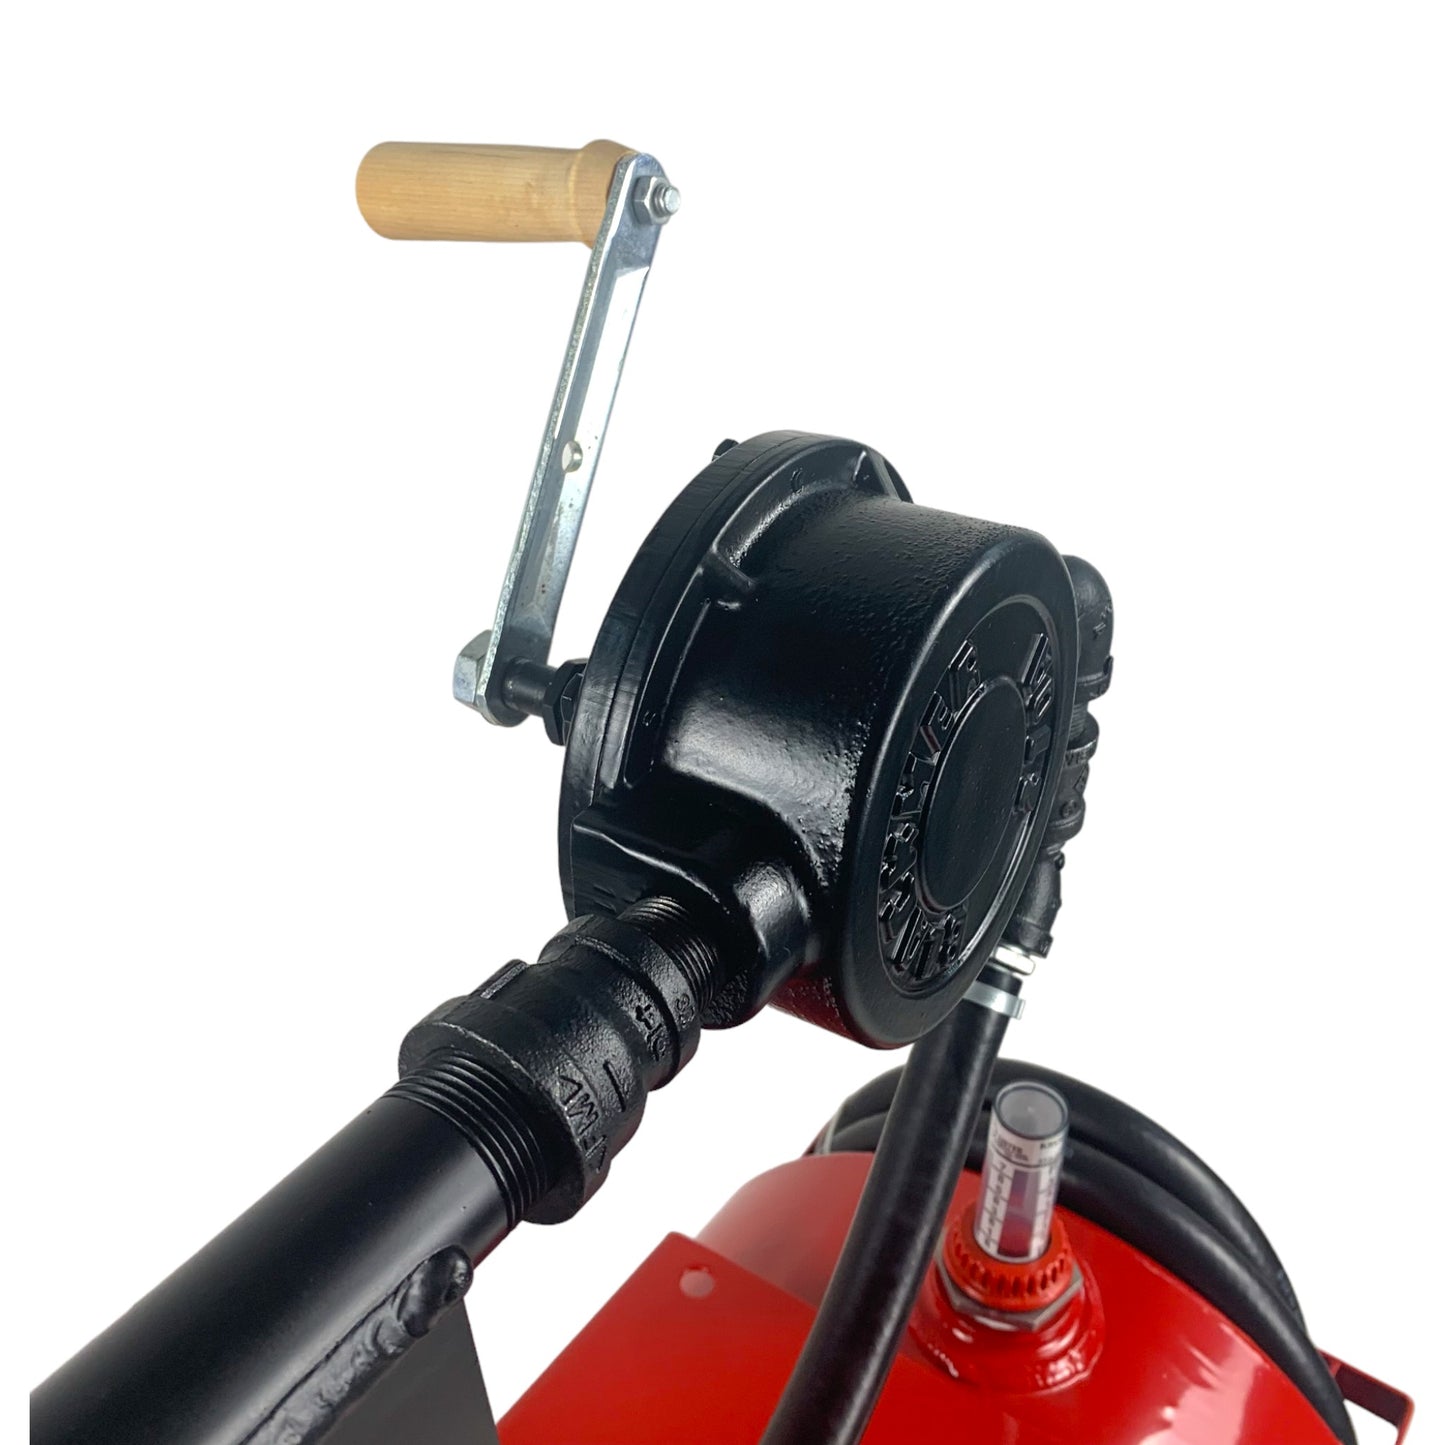 34 Gallon Gas Buggy® with Heavy Duty Manual Hand Pump